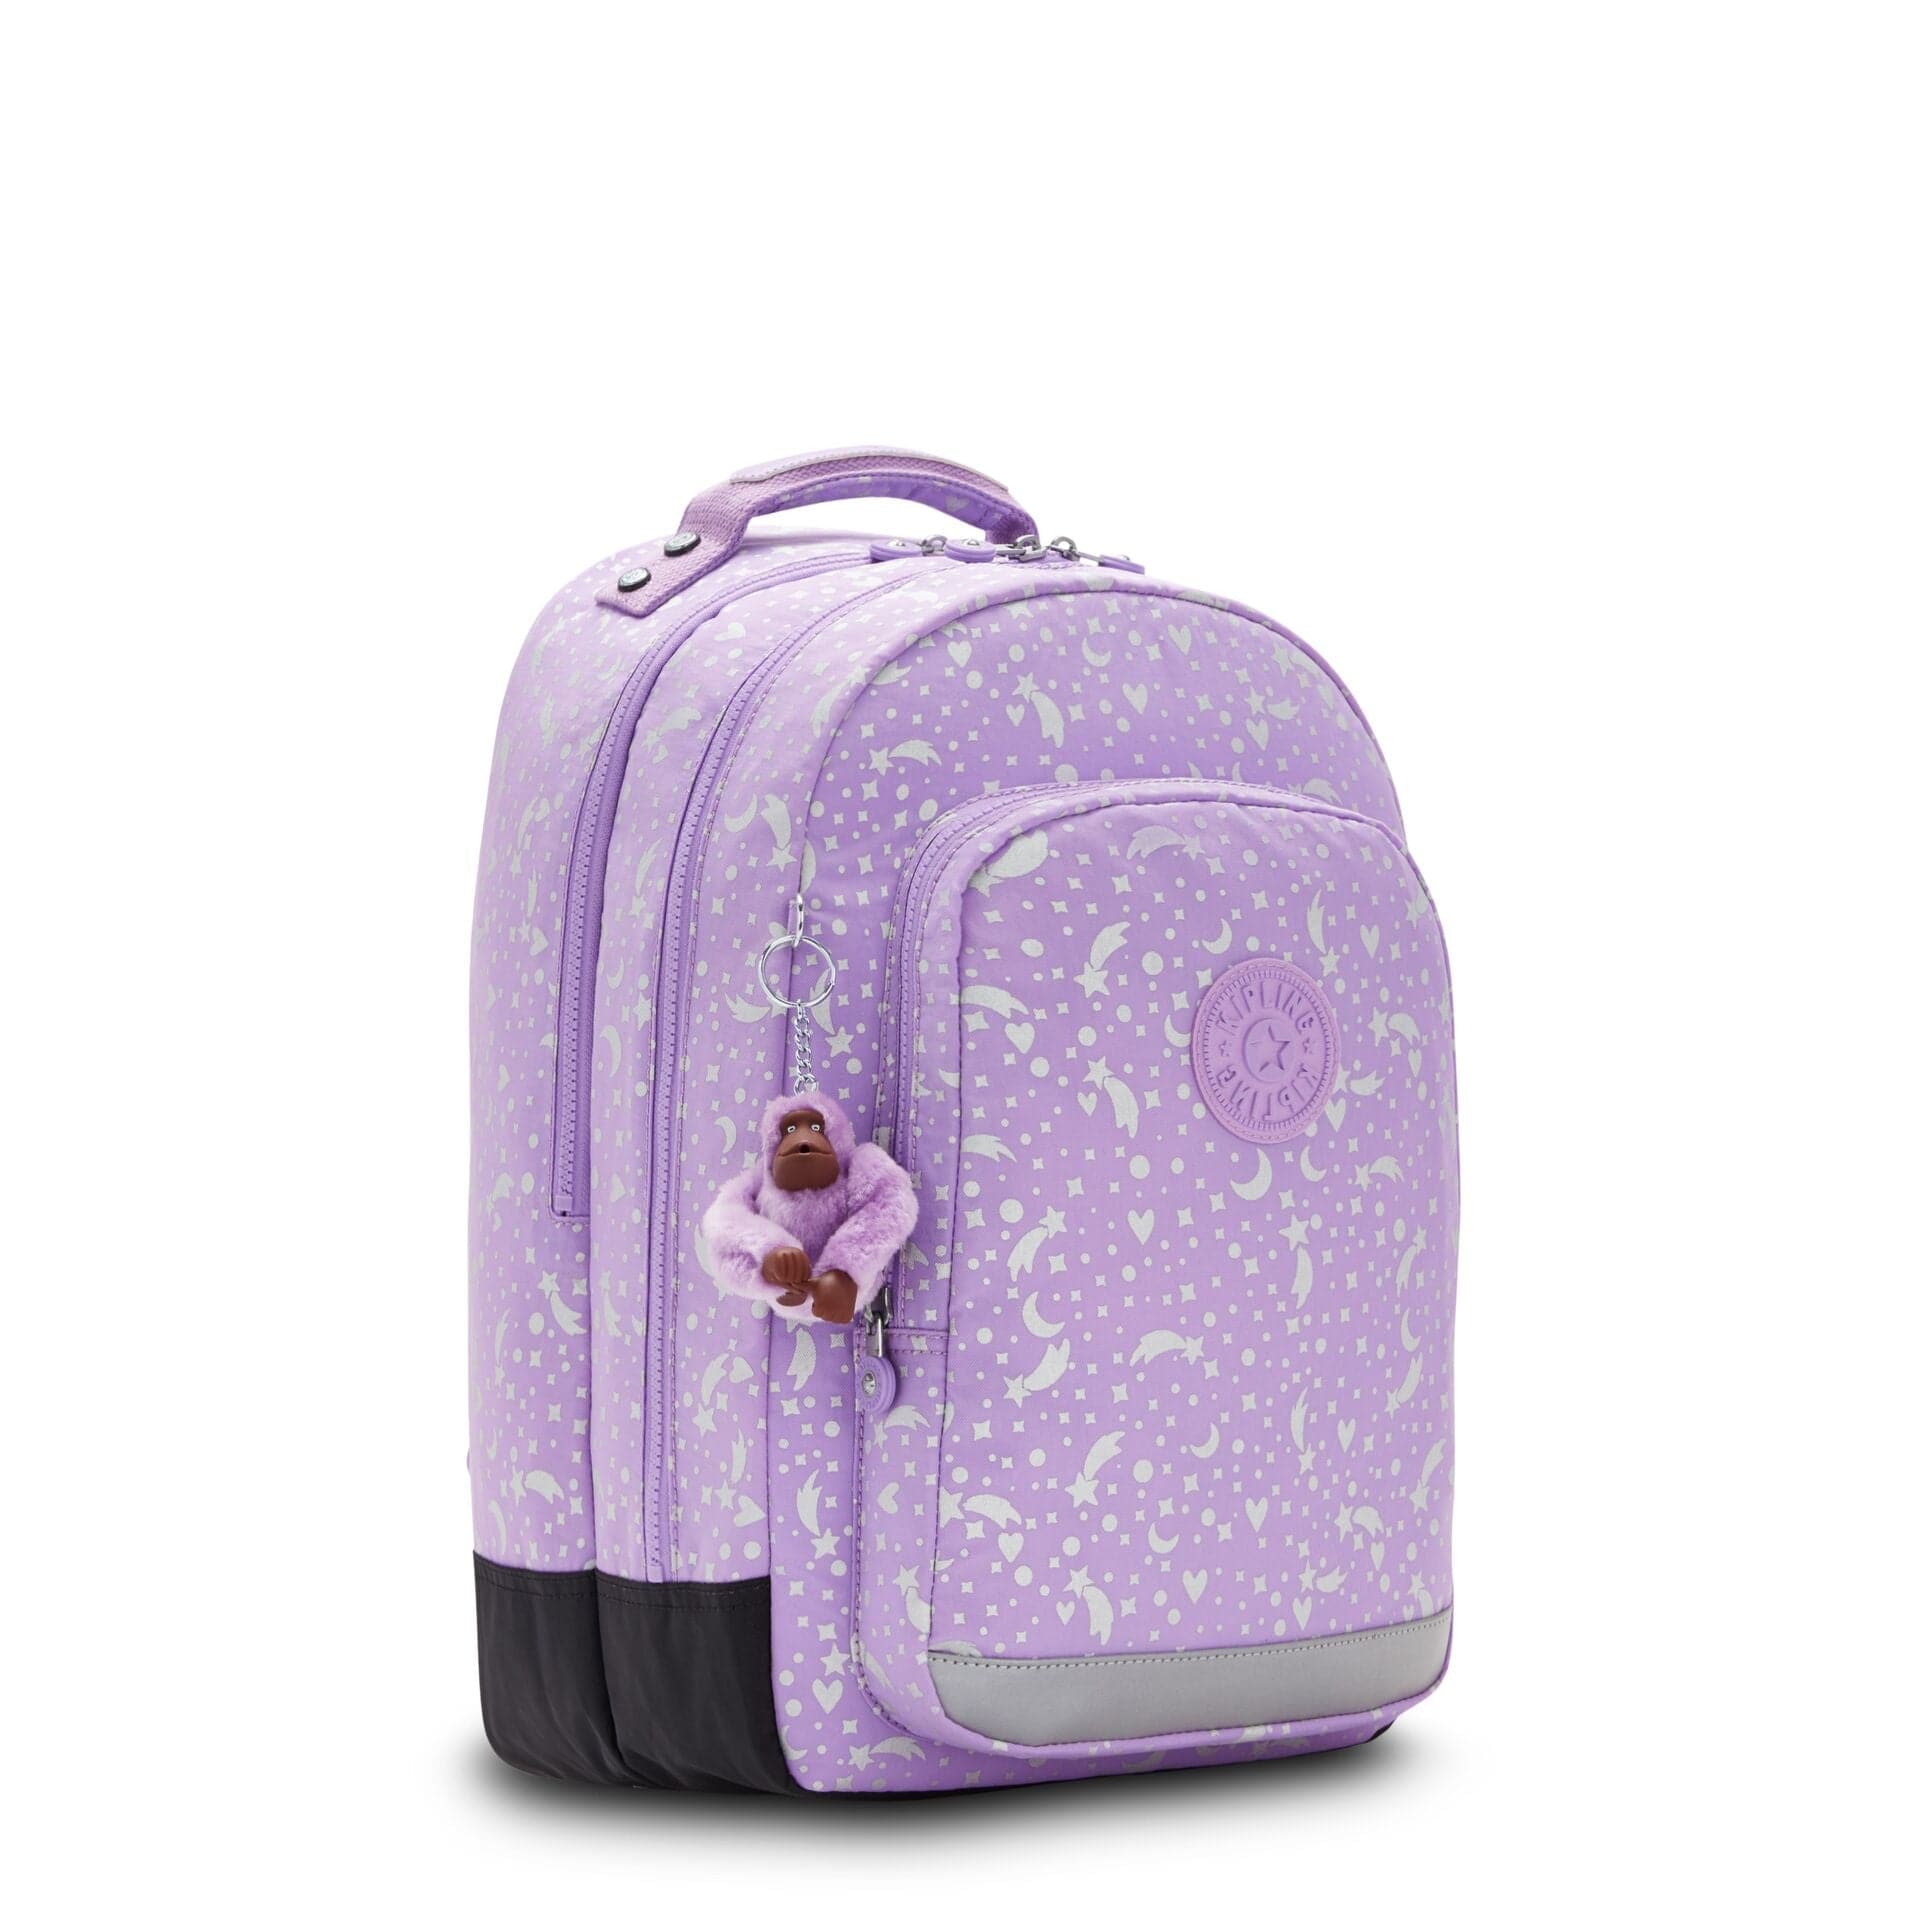 KIPLING-Class Room-Large backpack (with laptop protection)-Galaxy Metallic-I7090-P06